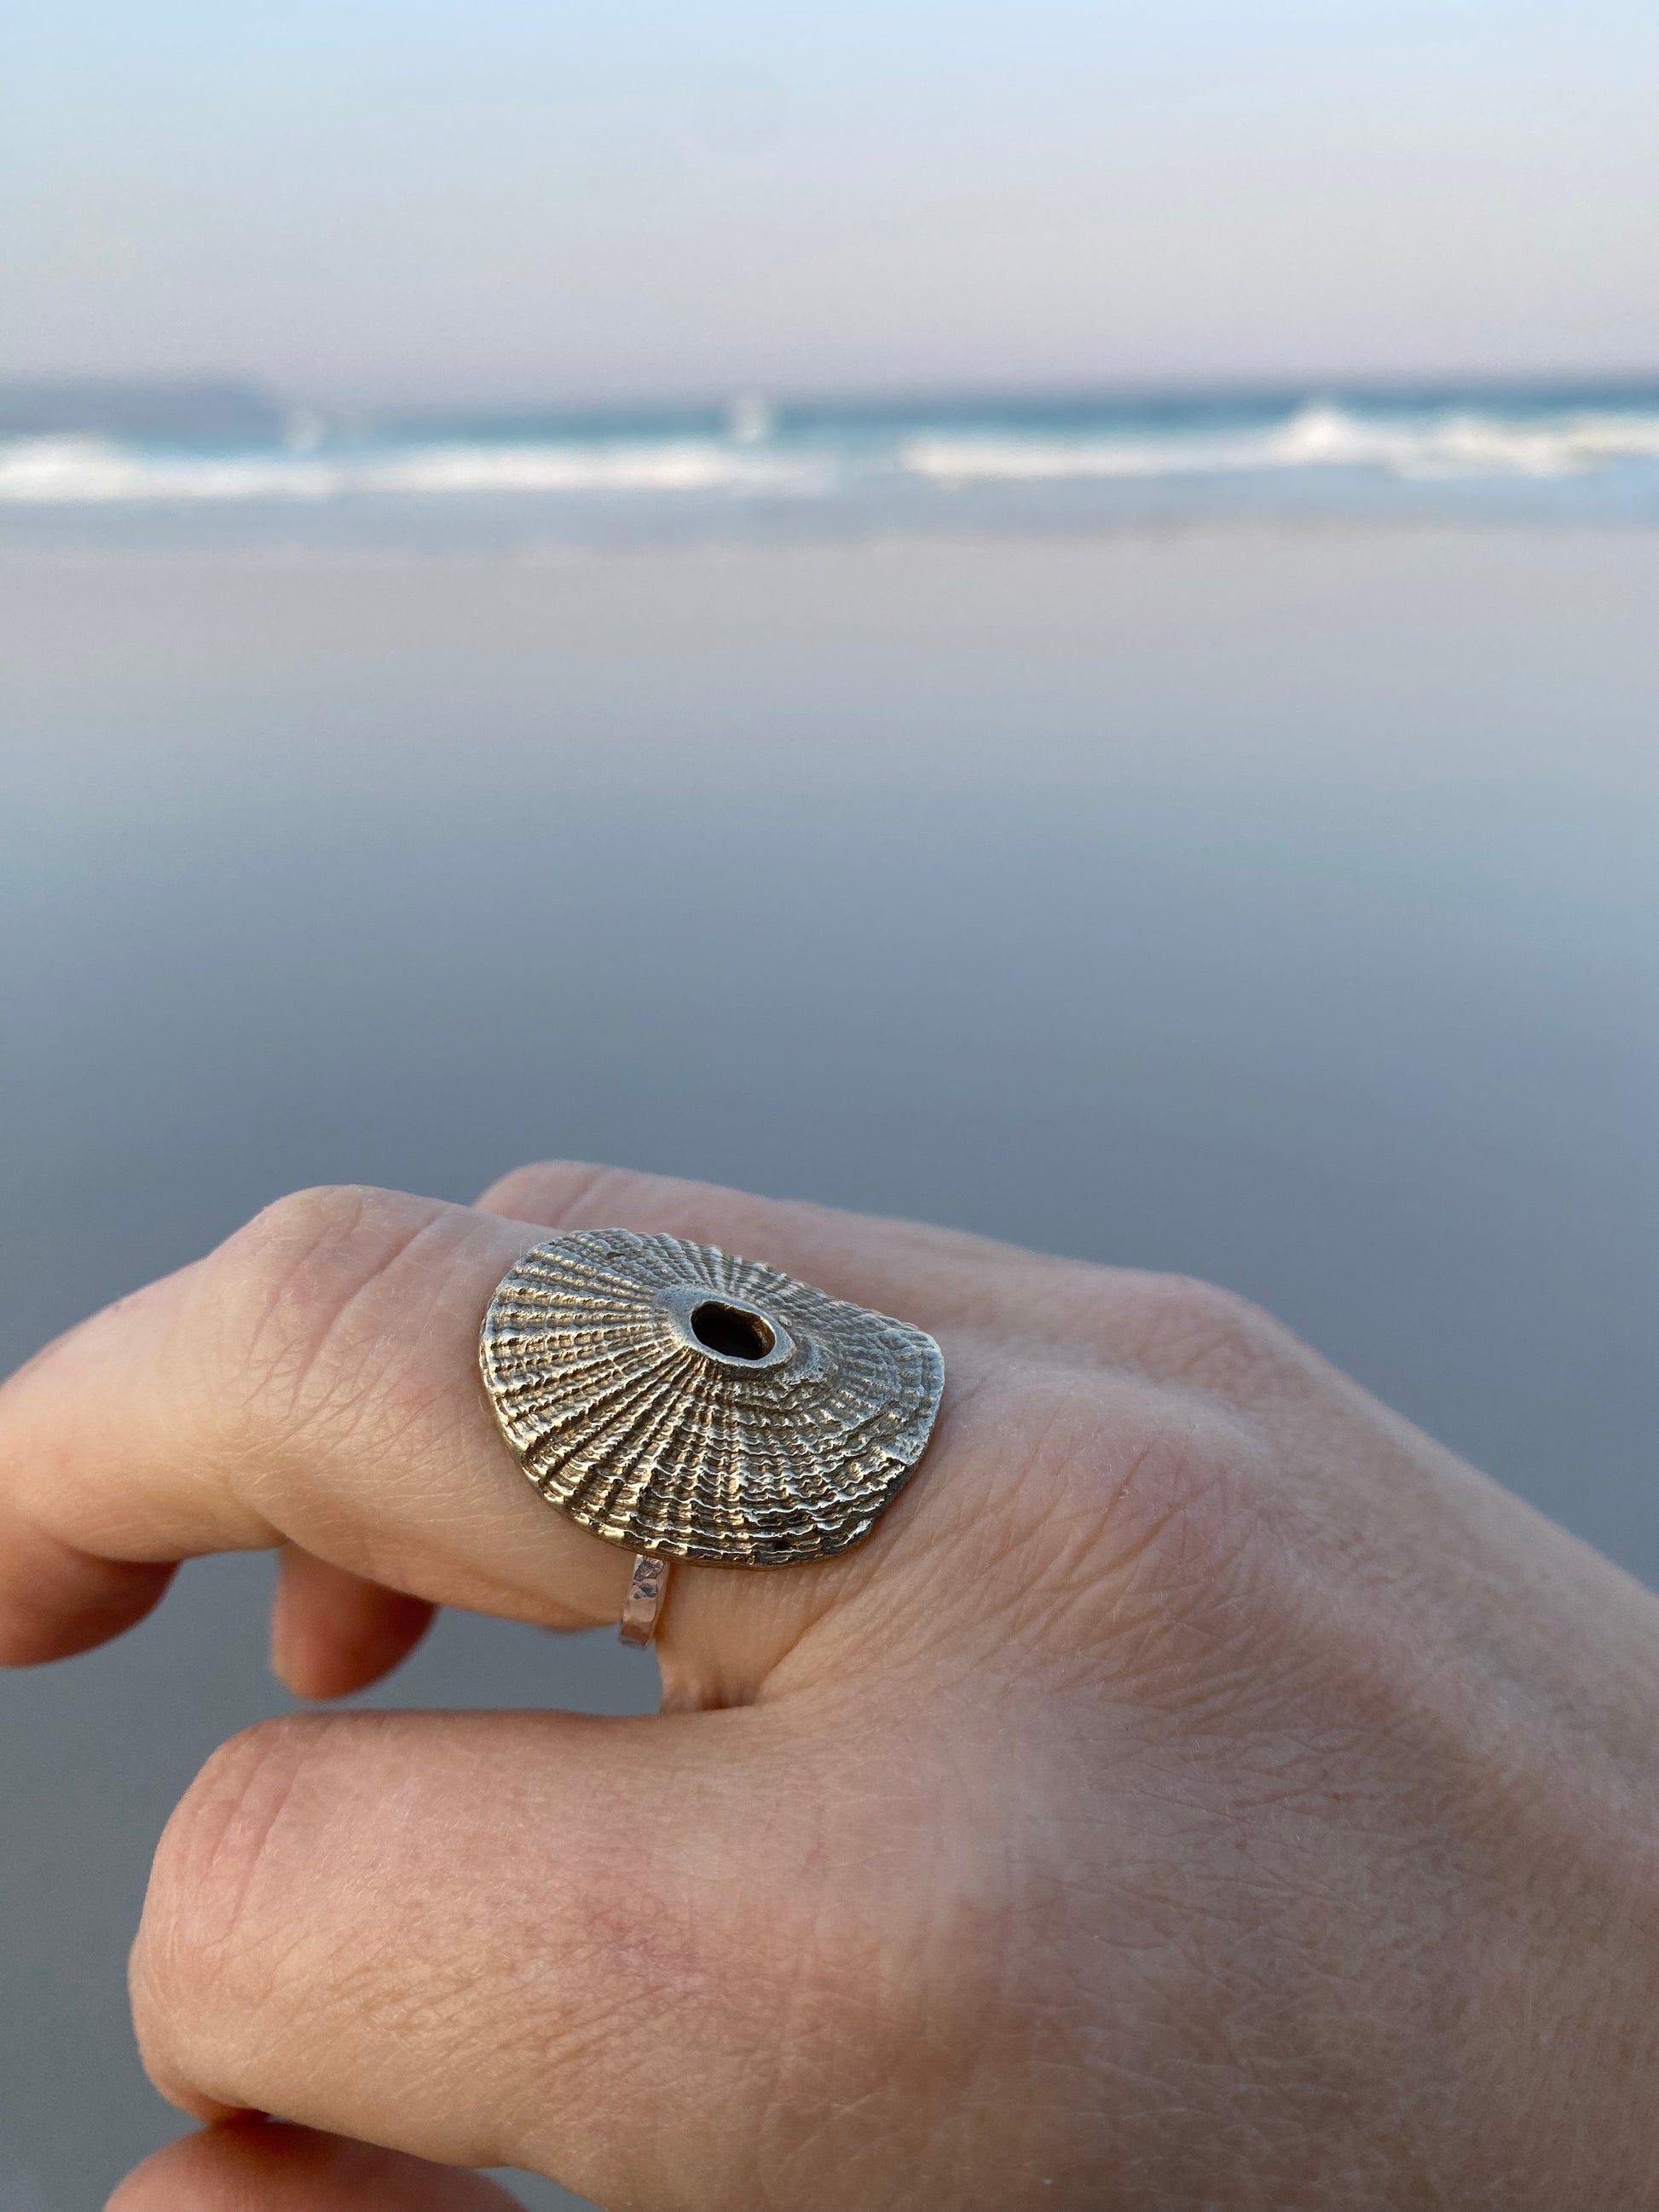 Hand modeling a textured Santa Maria shell ring with ocean waves in the soft-focus background.